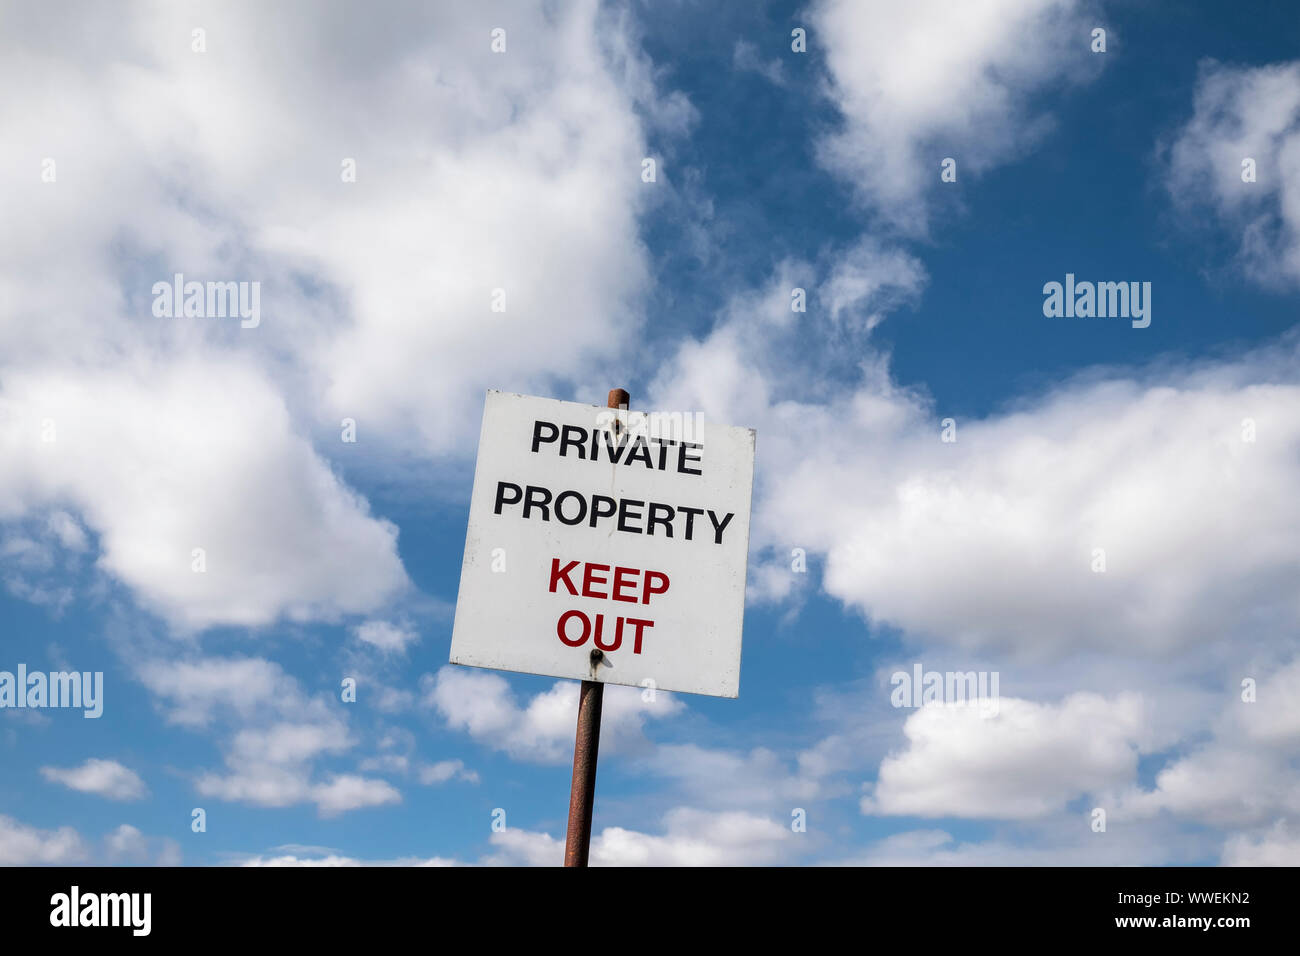 Private property, keep out sign. Suffolk, UK. Stock Photo